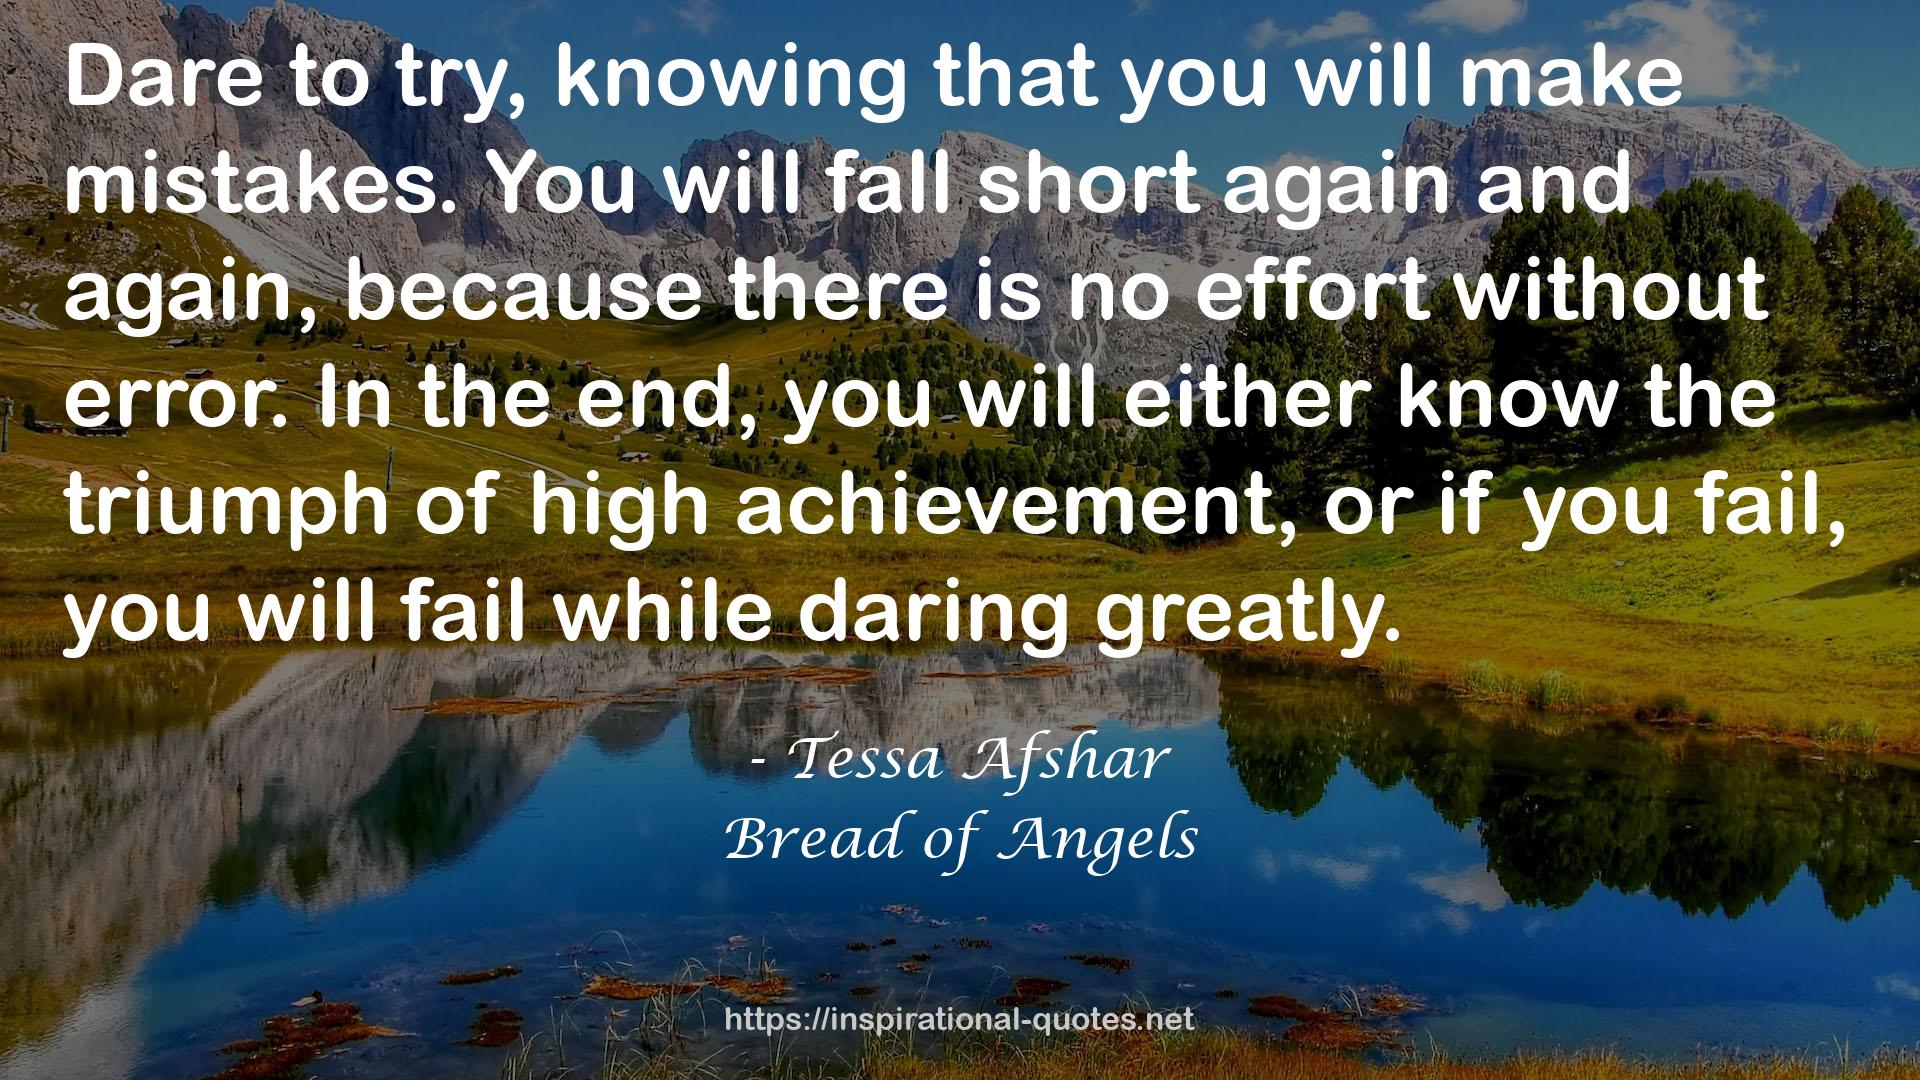 Bread of Angels QUOTES